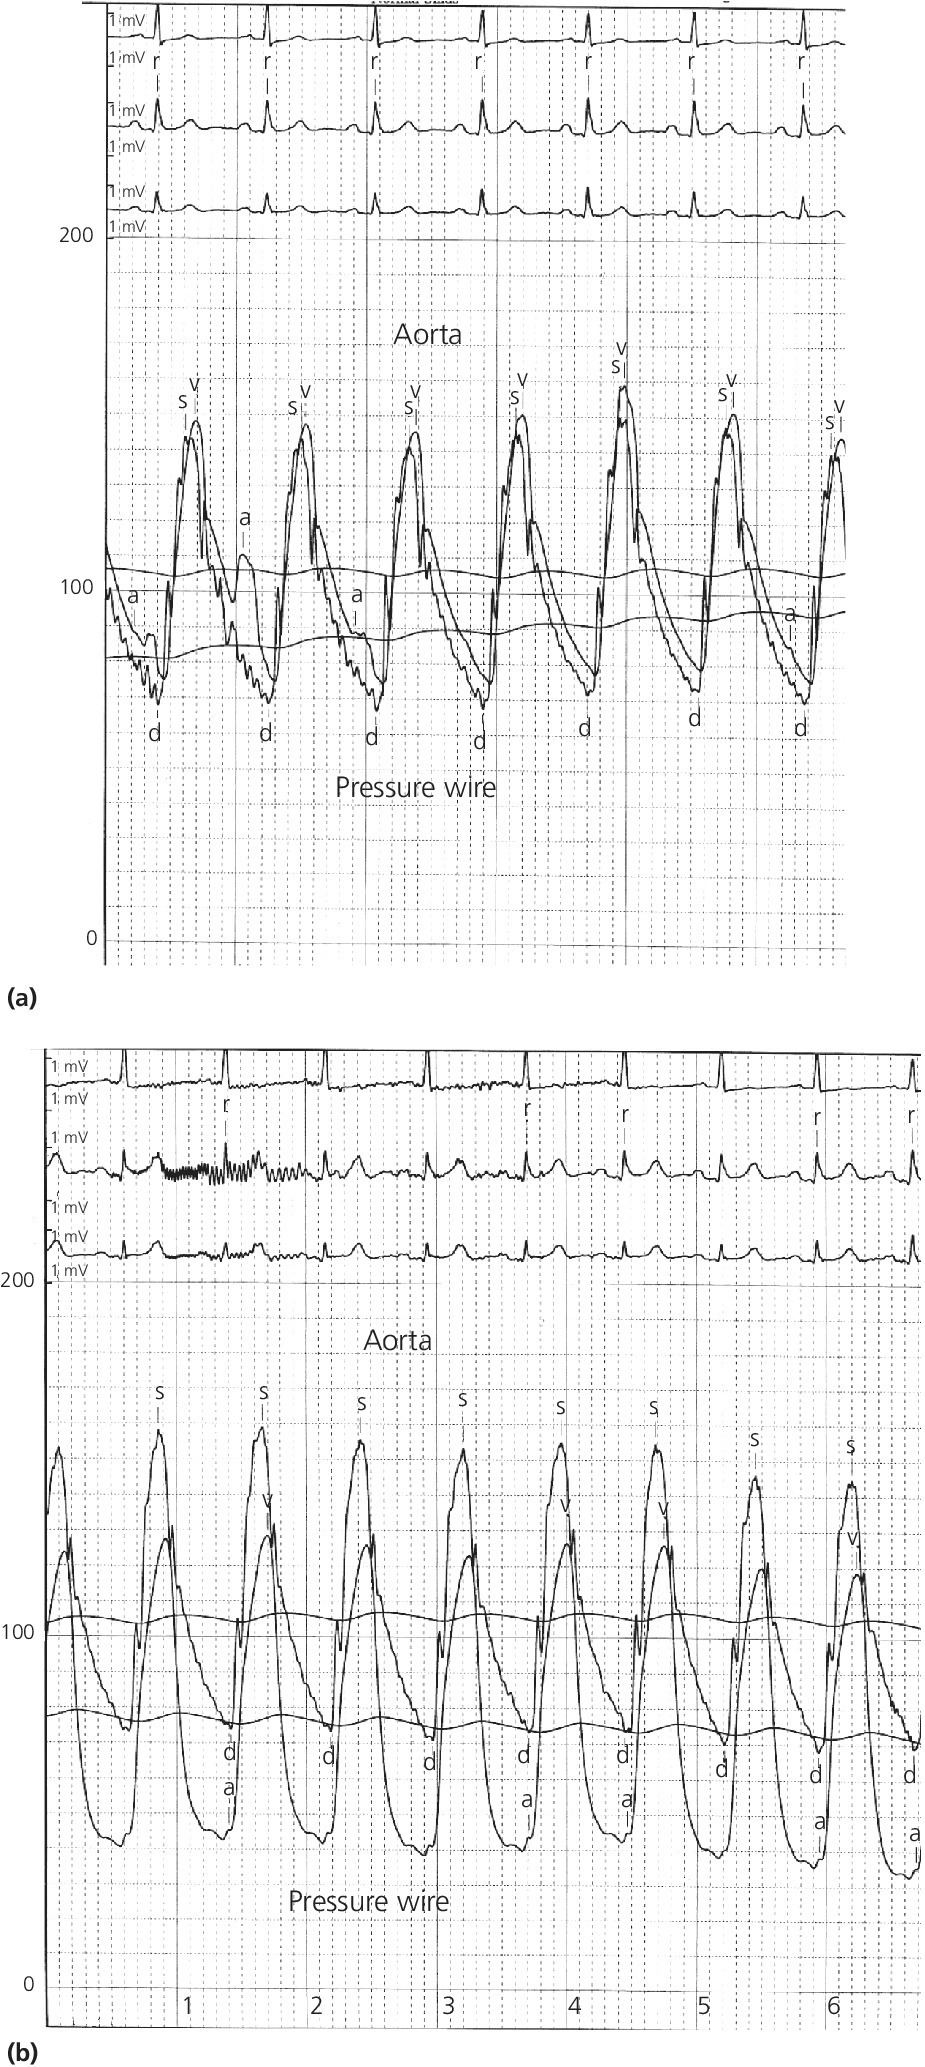 2 ECGs of FFR measurement displaying pressure in aorta and distal LAD (labeled pressure wire) at rest (top) and following intracoronary administration of adenosine (bottom).